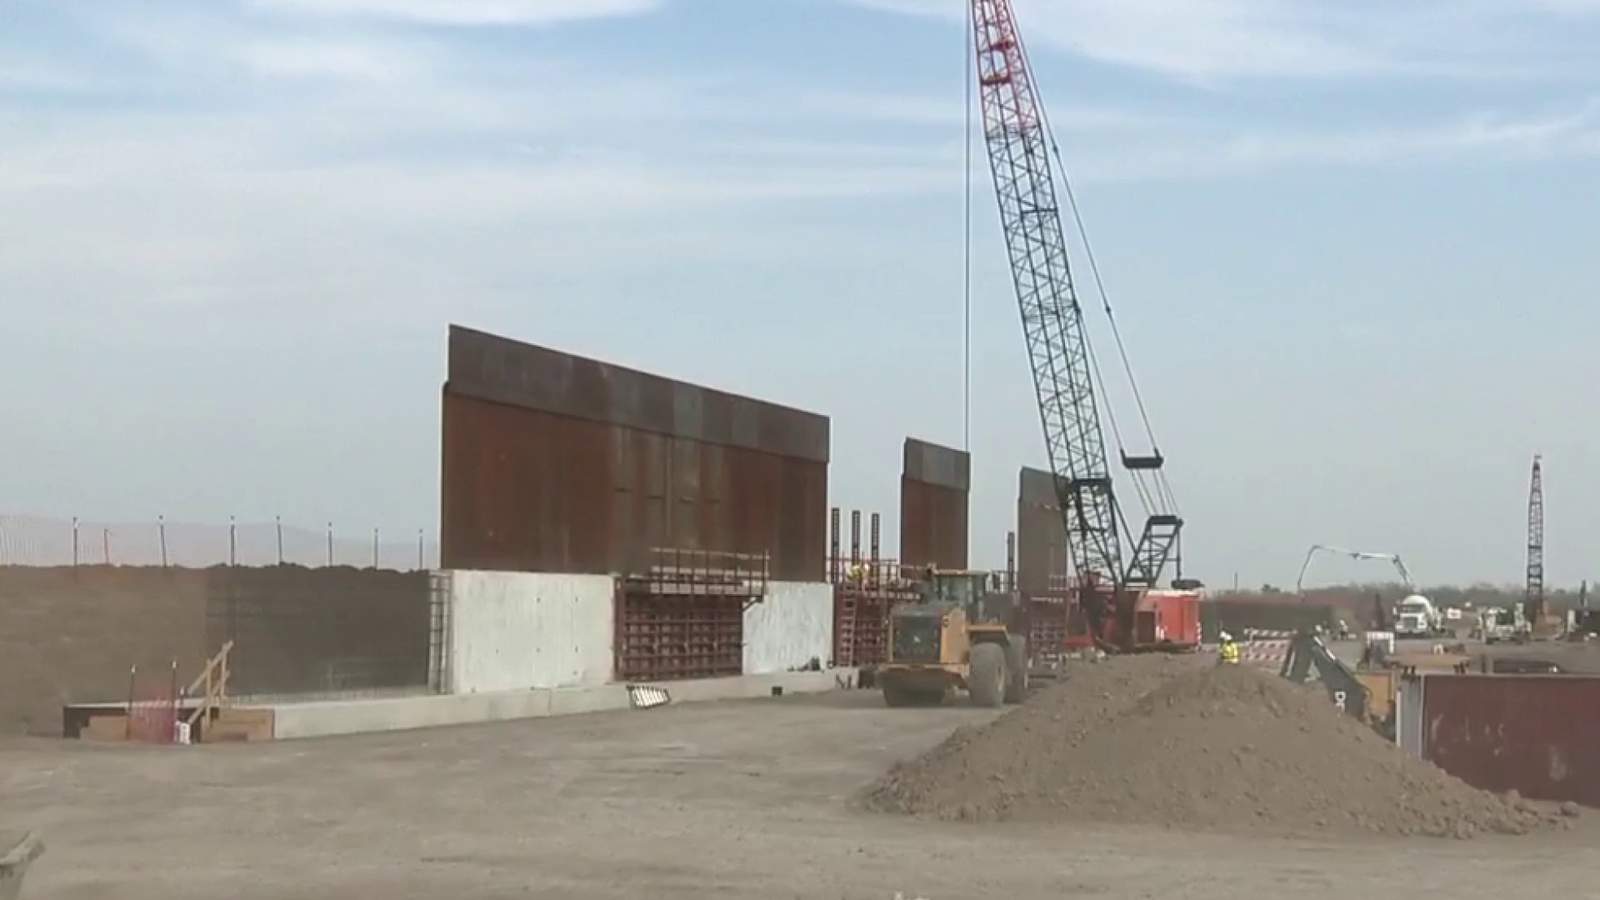 Rio Grande Valley getting its first new border wall under Trump administration